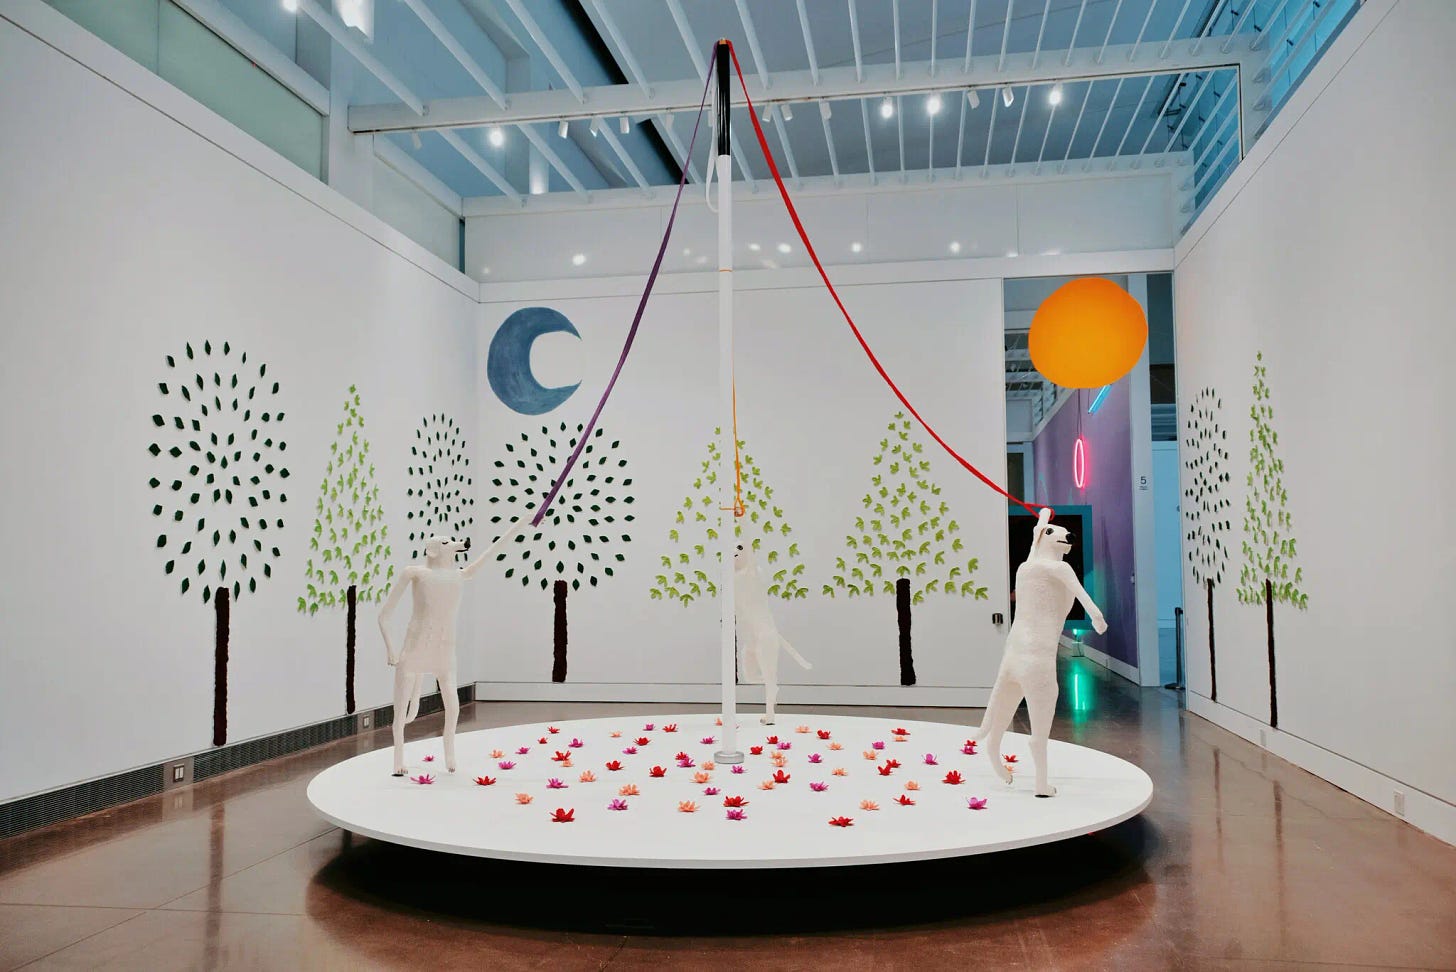 Three sculptures that are hybrids of the artist’s body and her dog’s body stand on hind legs, holding leashes, on a white platform in a gallery at the Queens Museum. There are art works on the walls resembling trees with round and triangular greenery.